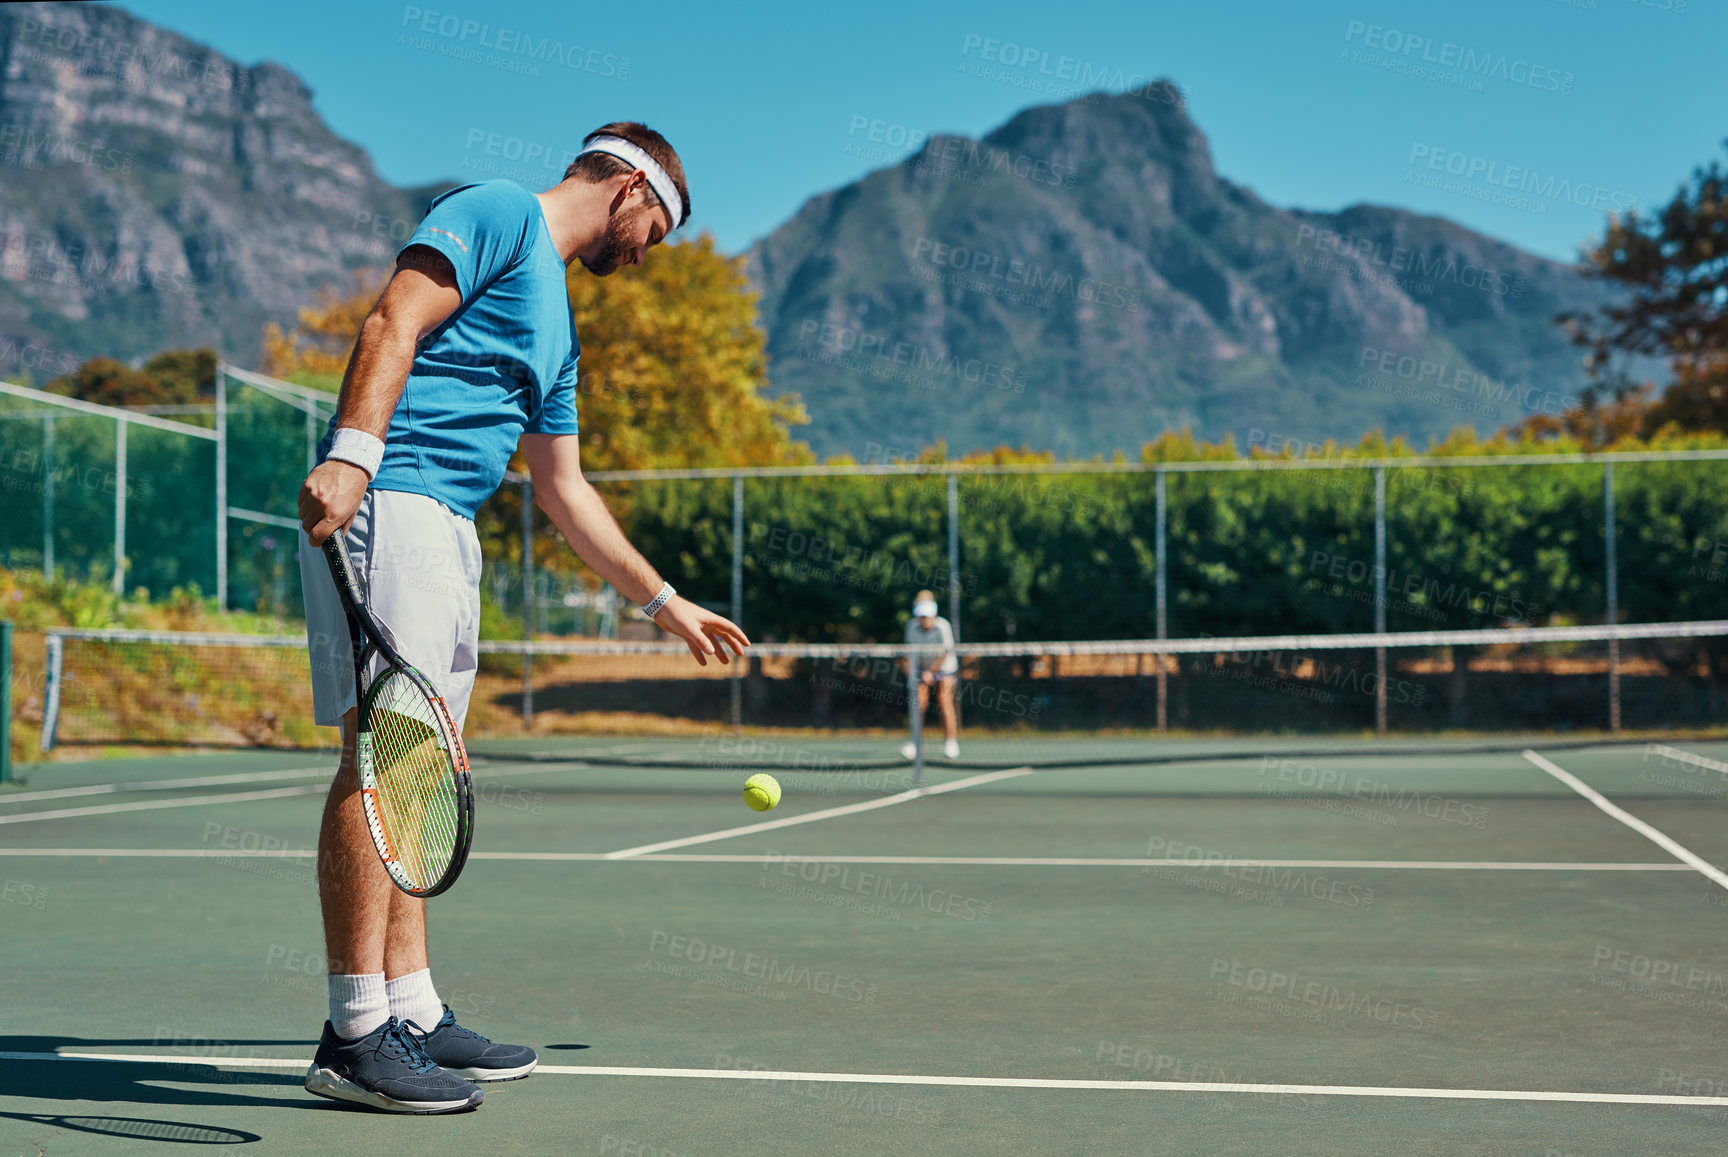 Buy stock photo Full length shot of a young male tennis player getting ready to serve the ball on a tennis court outdoors